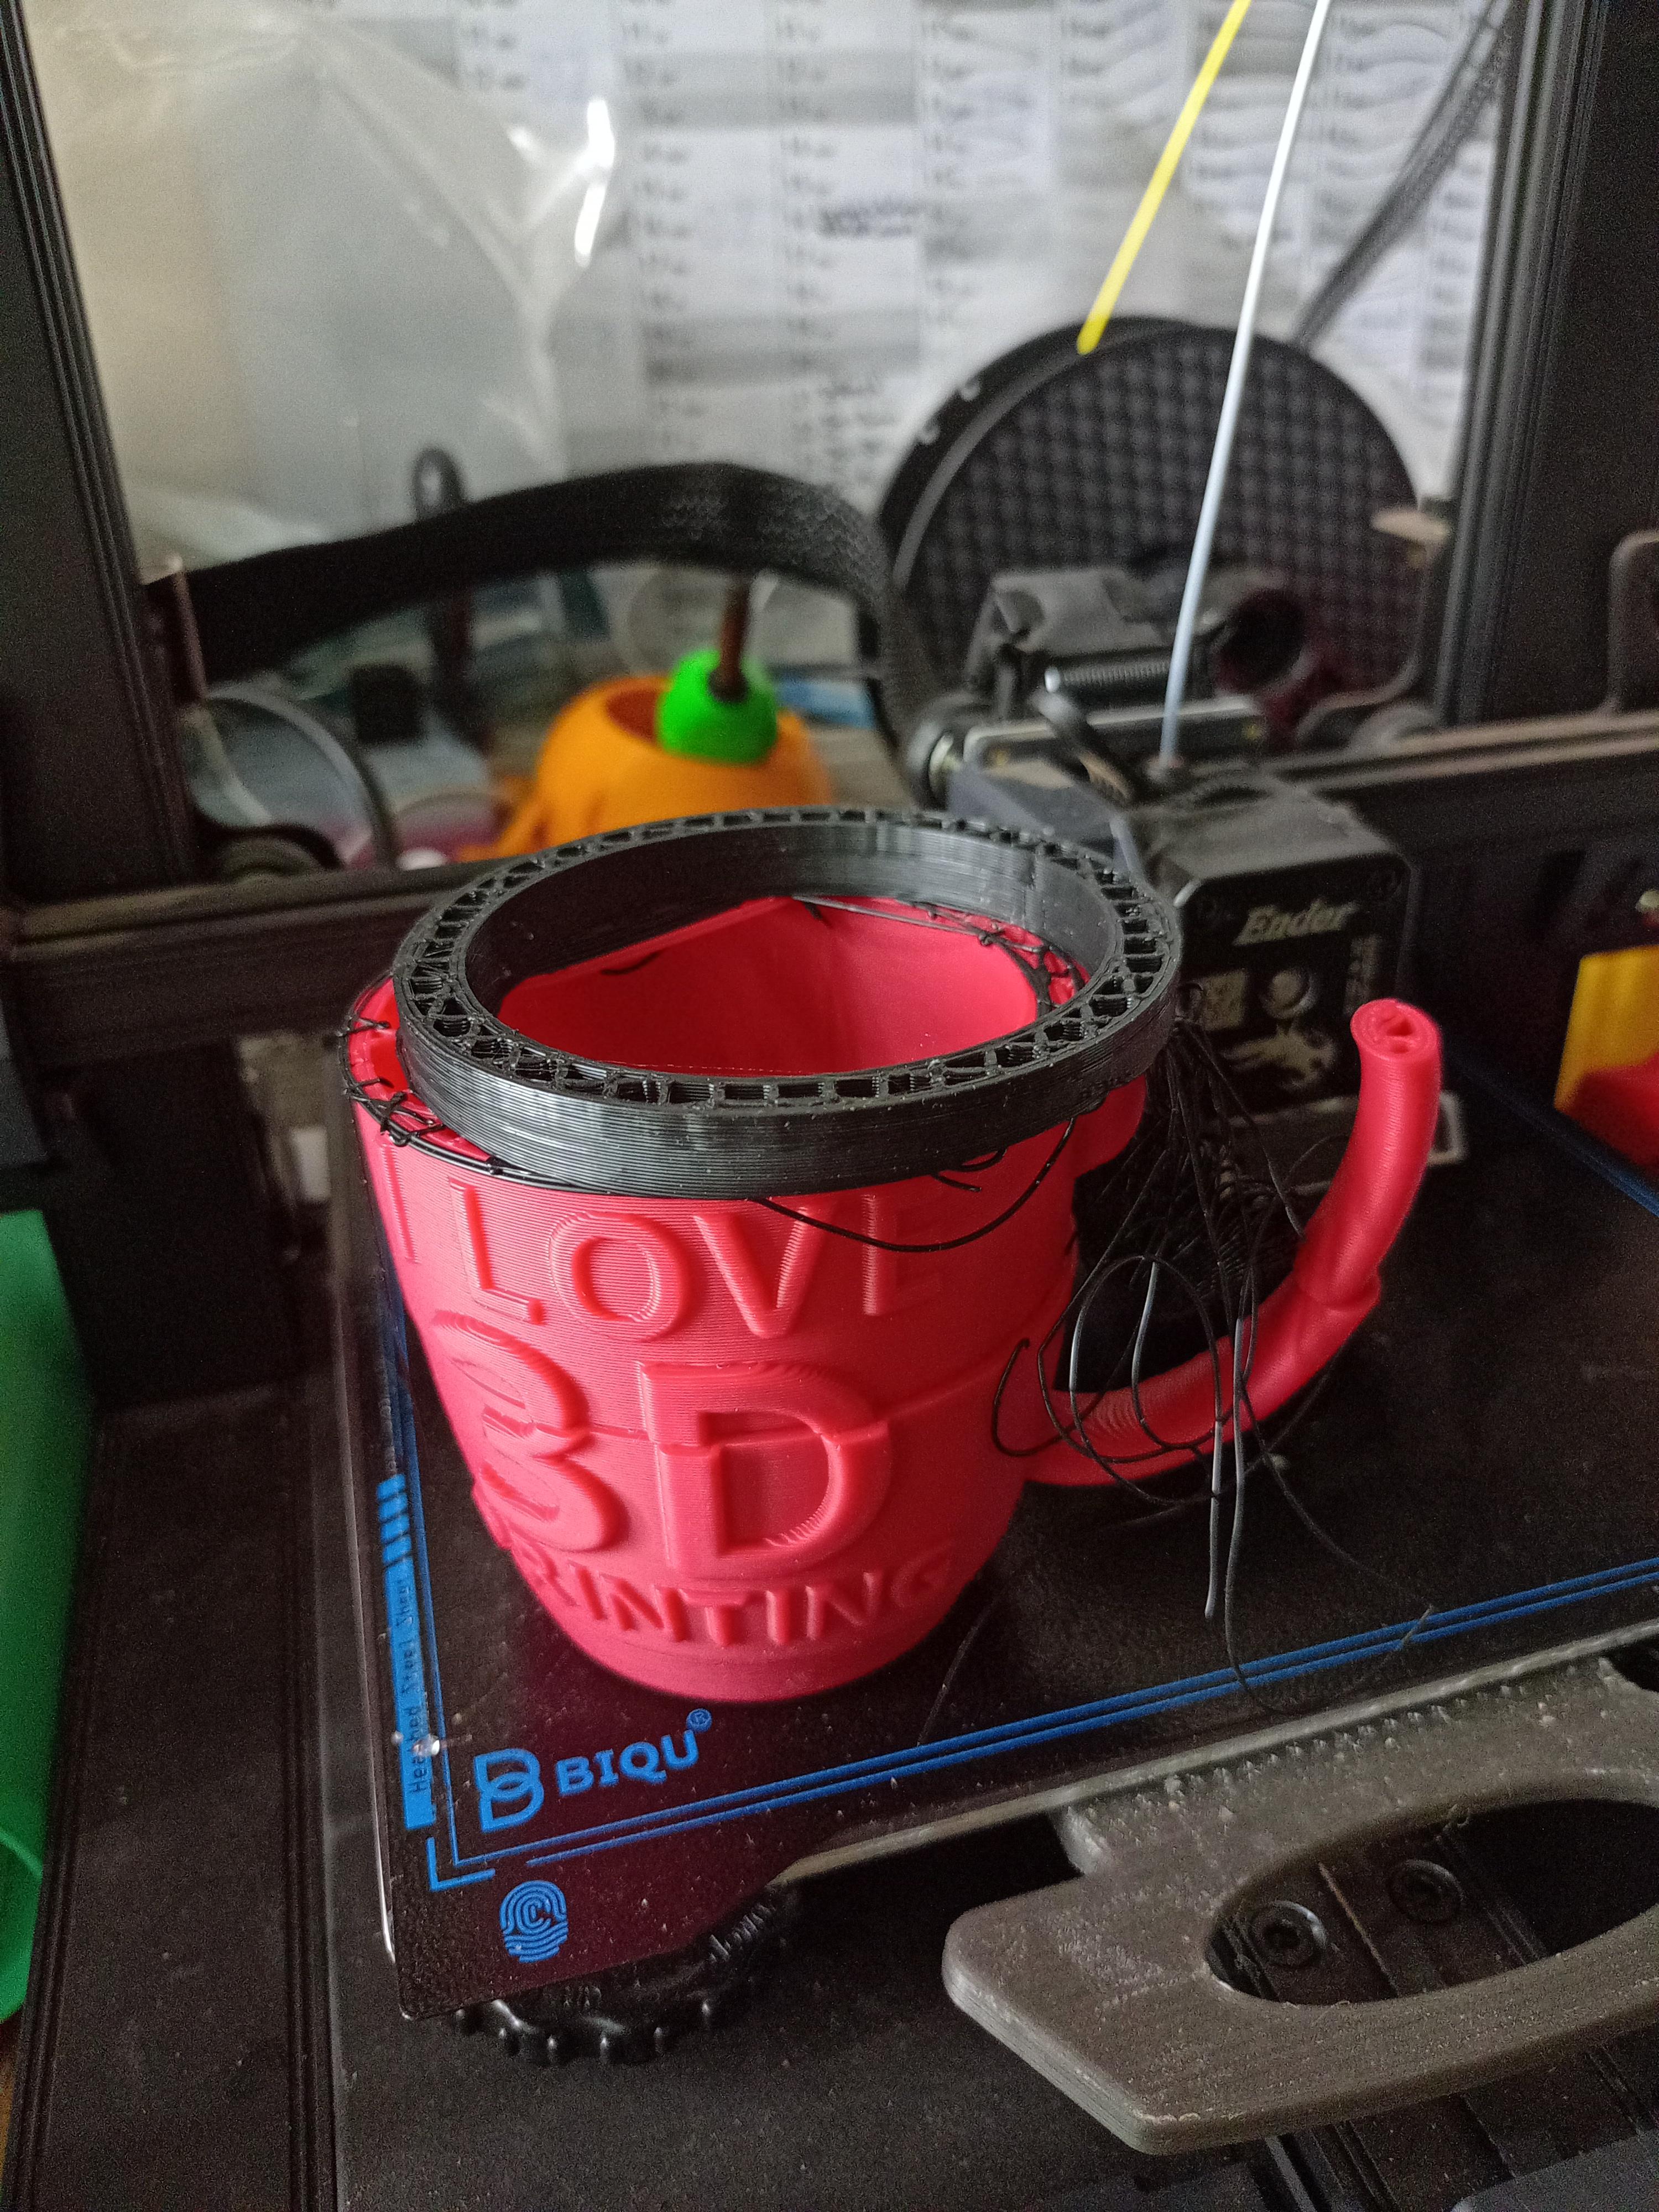 I Love 3D Printing Gag Gift Mug - Sliced for my 0.6mm nozzle, printed on my 0.4mm nozzle by accident.
So 0.4mm layer height on a 0.4mm nozzle.
Filament run out just before a power out of 2 hours.
Print came loose from the bed.
So here we have a true masterpiece. - 3d model